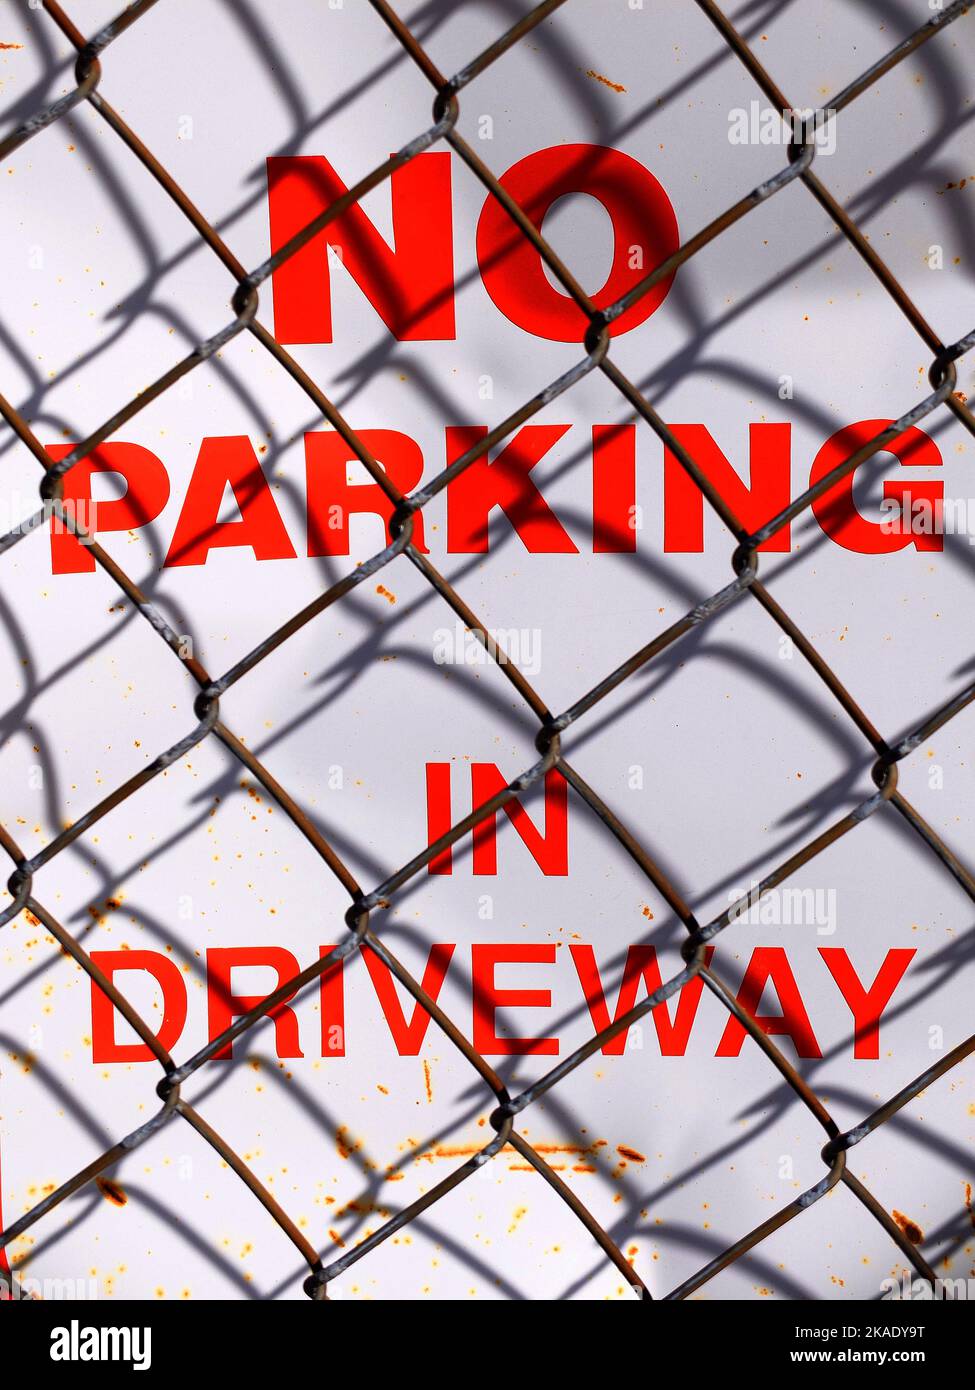 No parking in driveway sign with chain link chainlink fence shadows Stock Photo